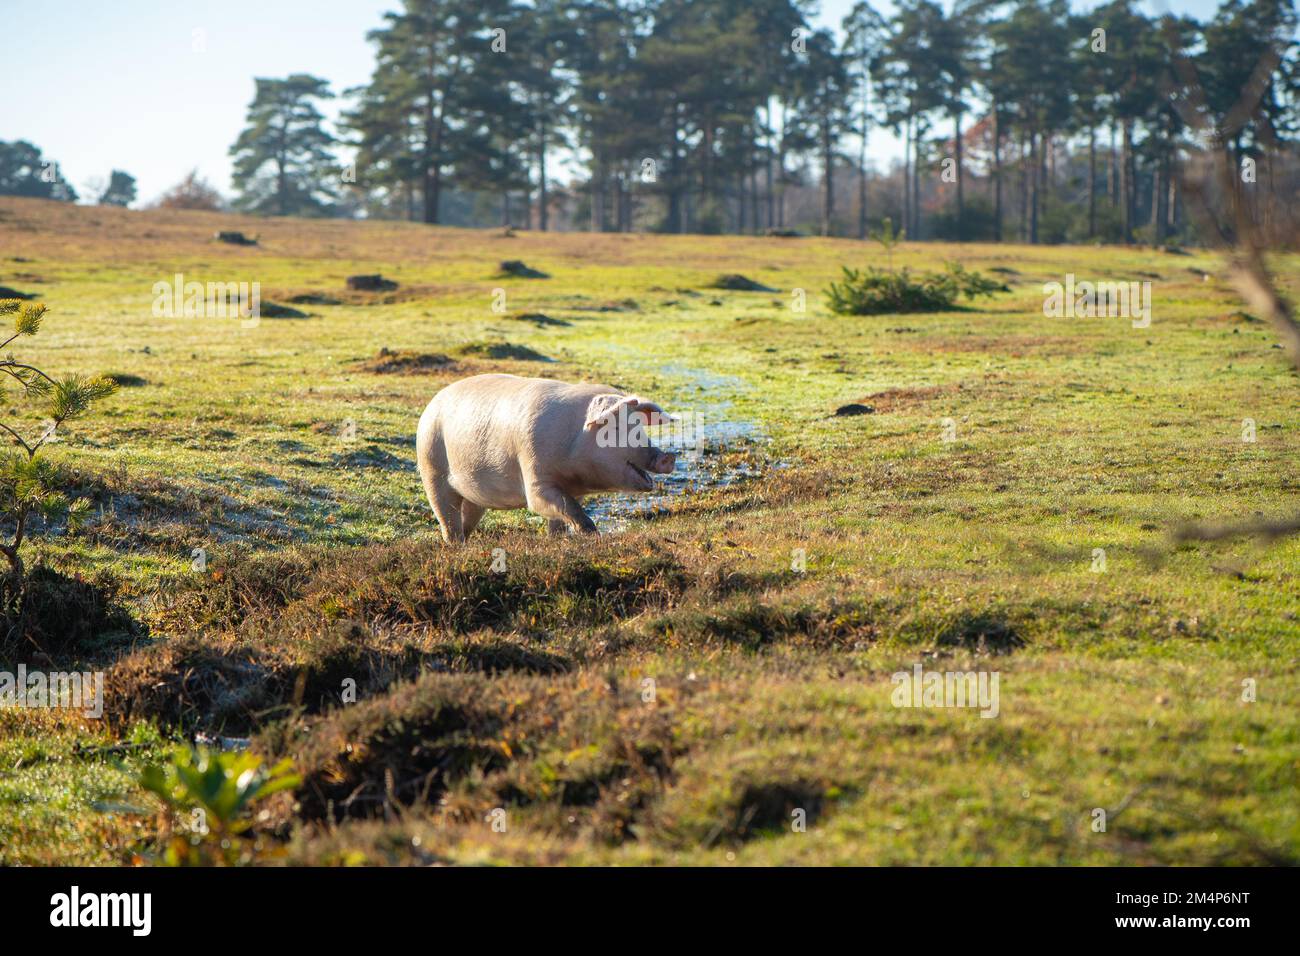 Wild pigs during pannage season explore the bogs and mire lands of The New Forest searching for acorns and food. Stock Photo